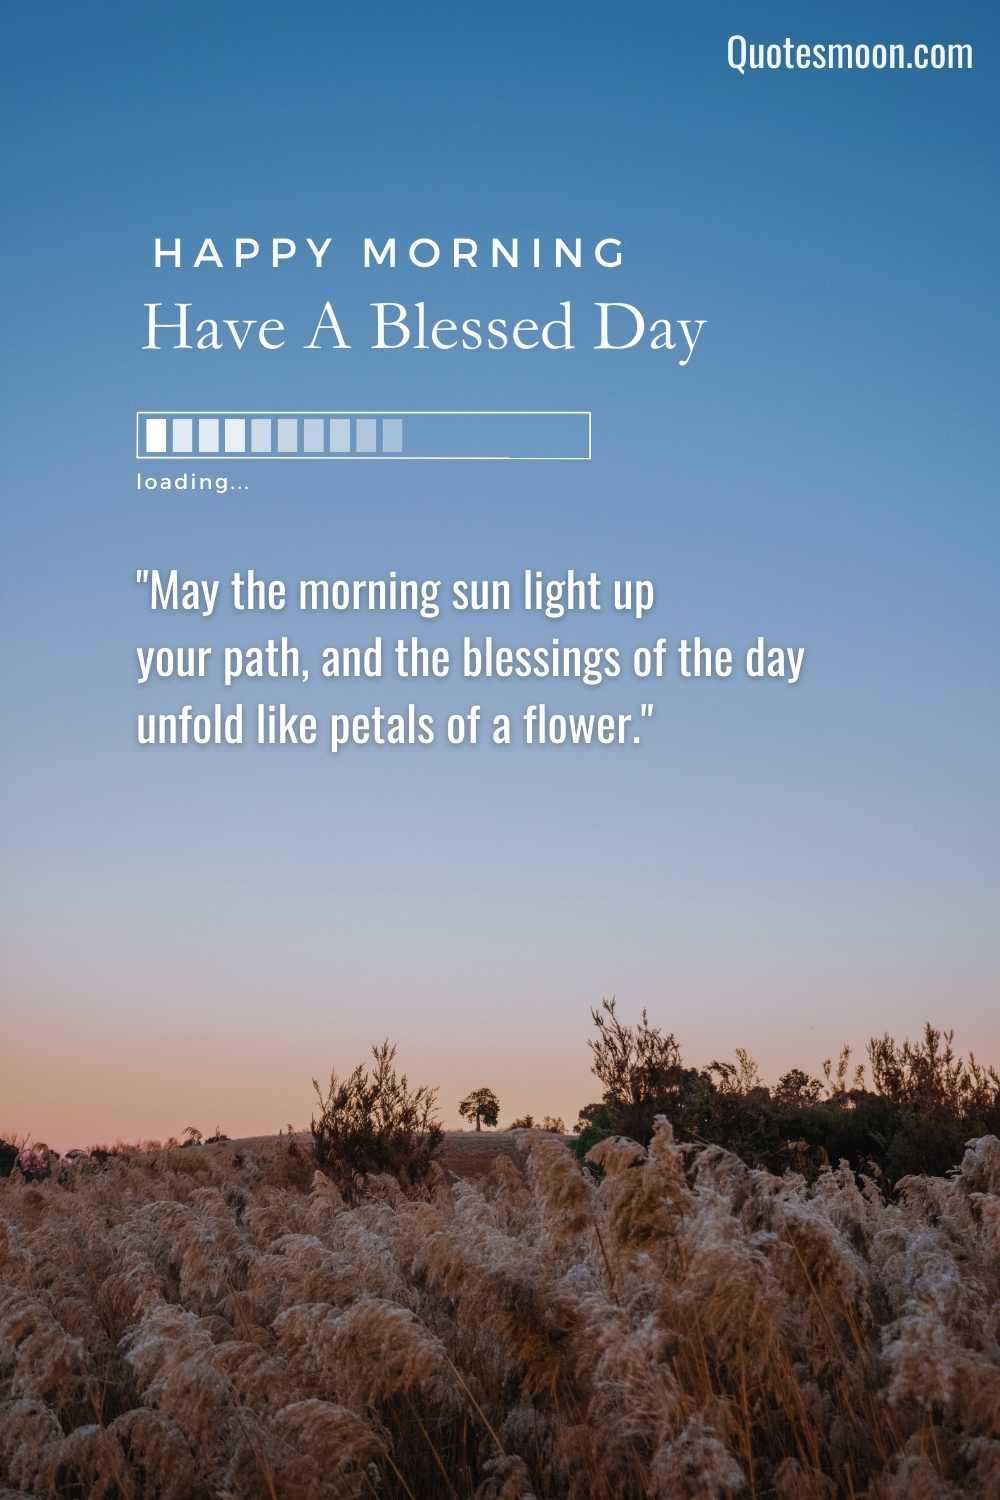 Blessings For A Blessed Morning